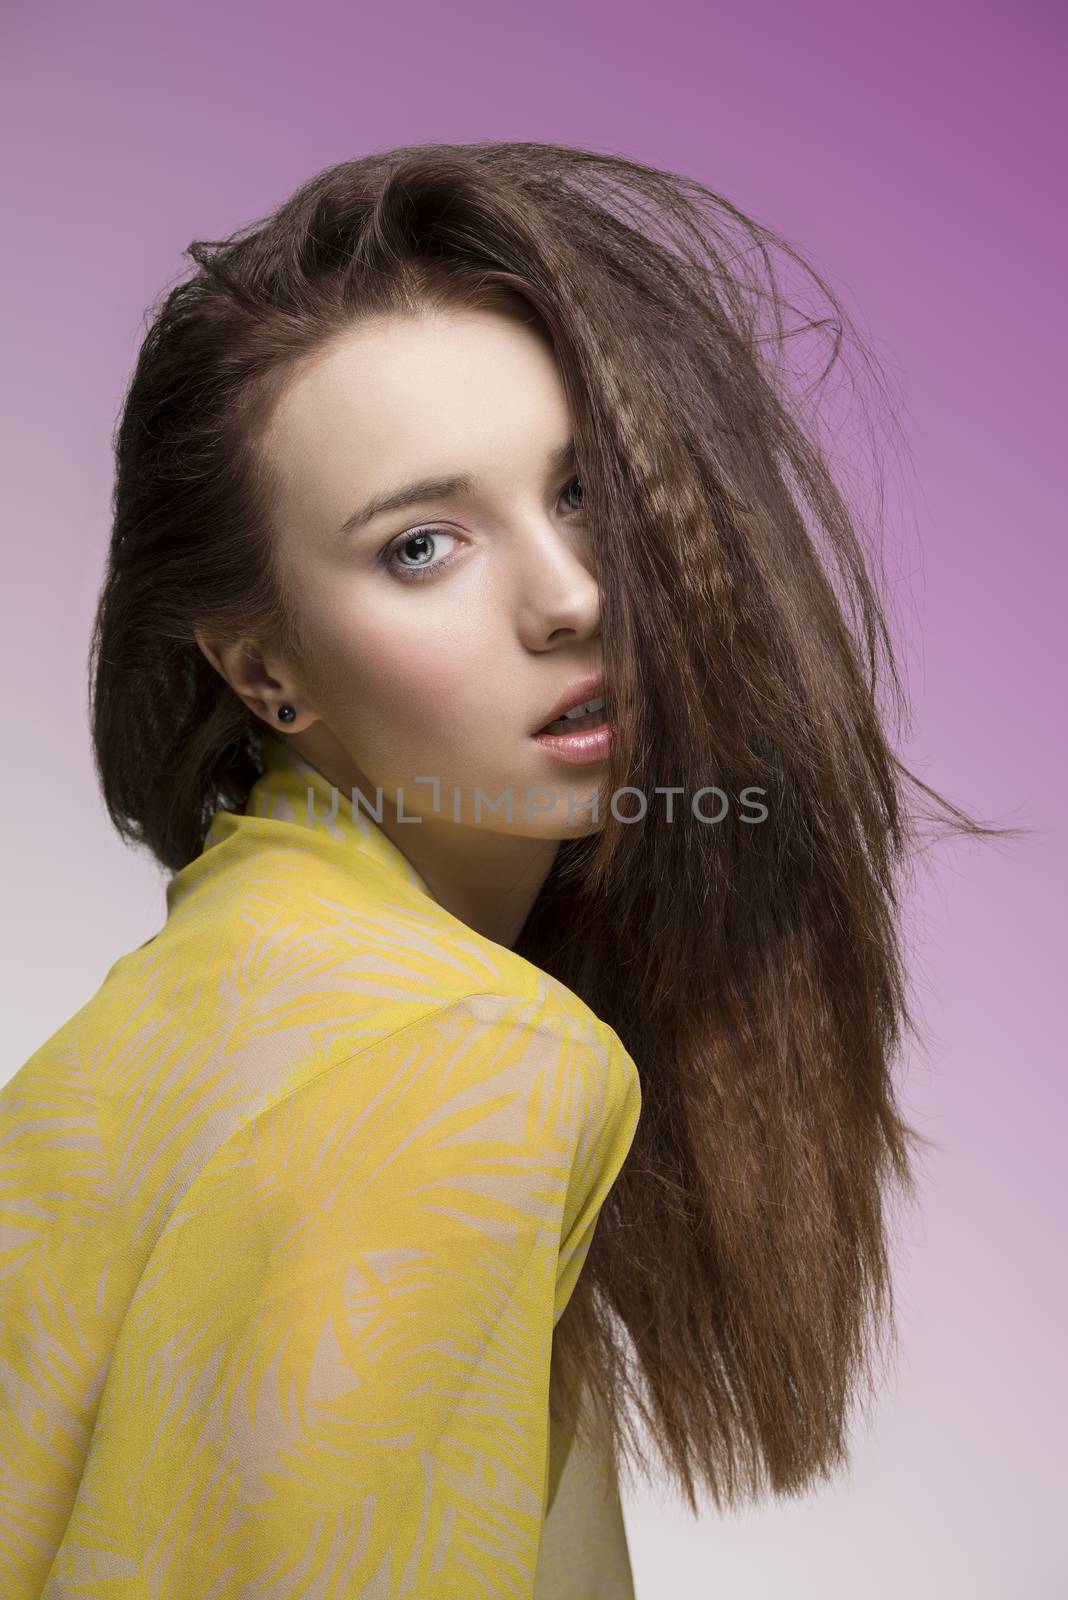 sensual woman with dishevelled hair-style by fotoCD